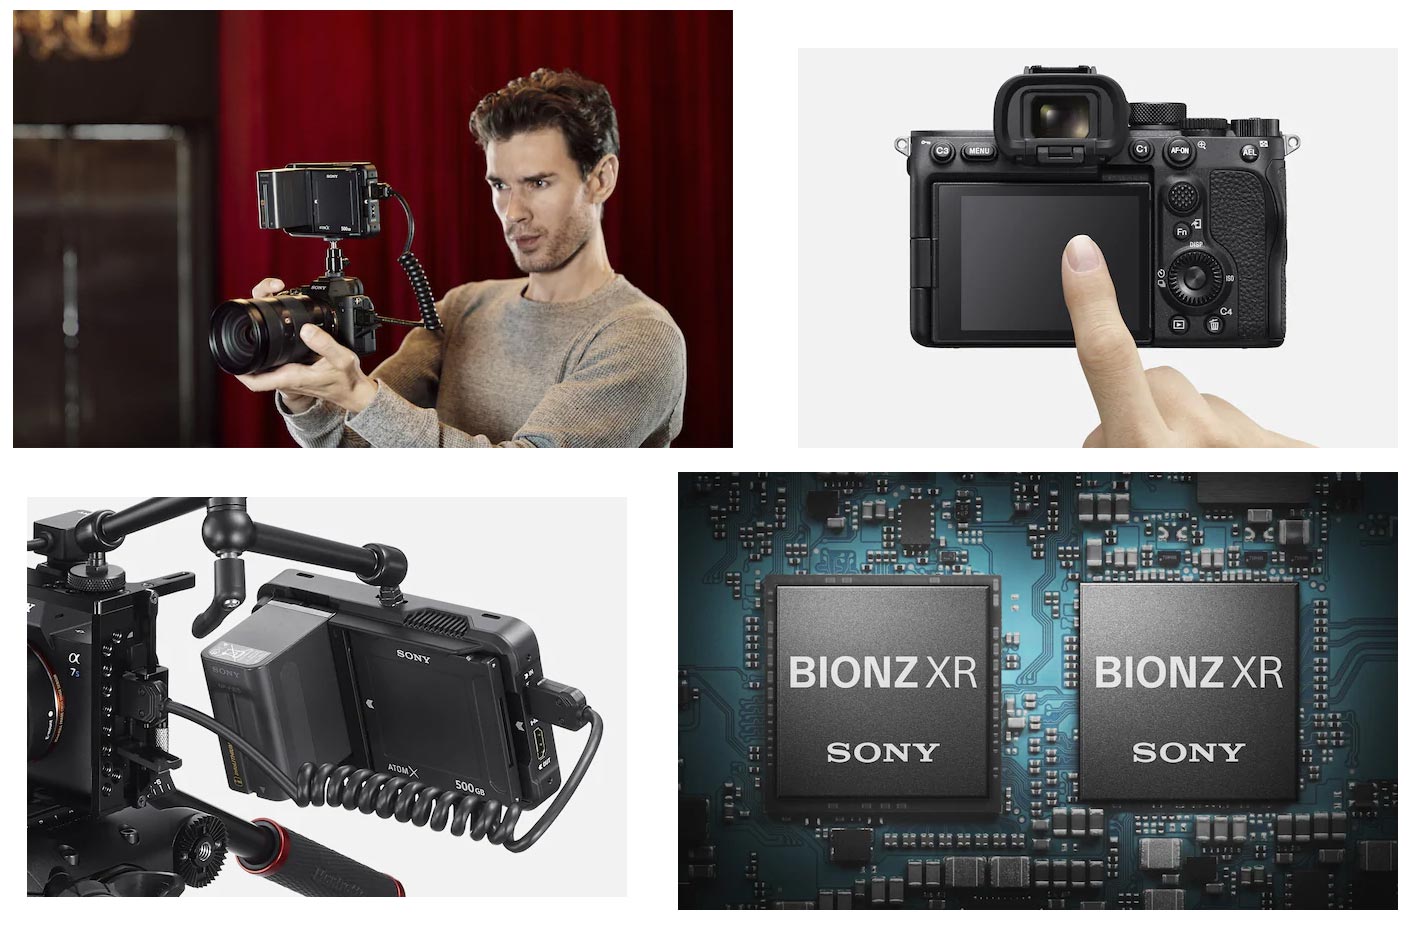 Sony Alpha 7S III: designed for photo and video journalists